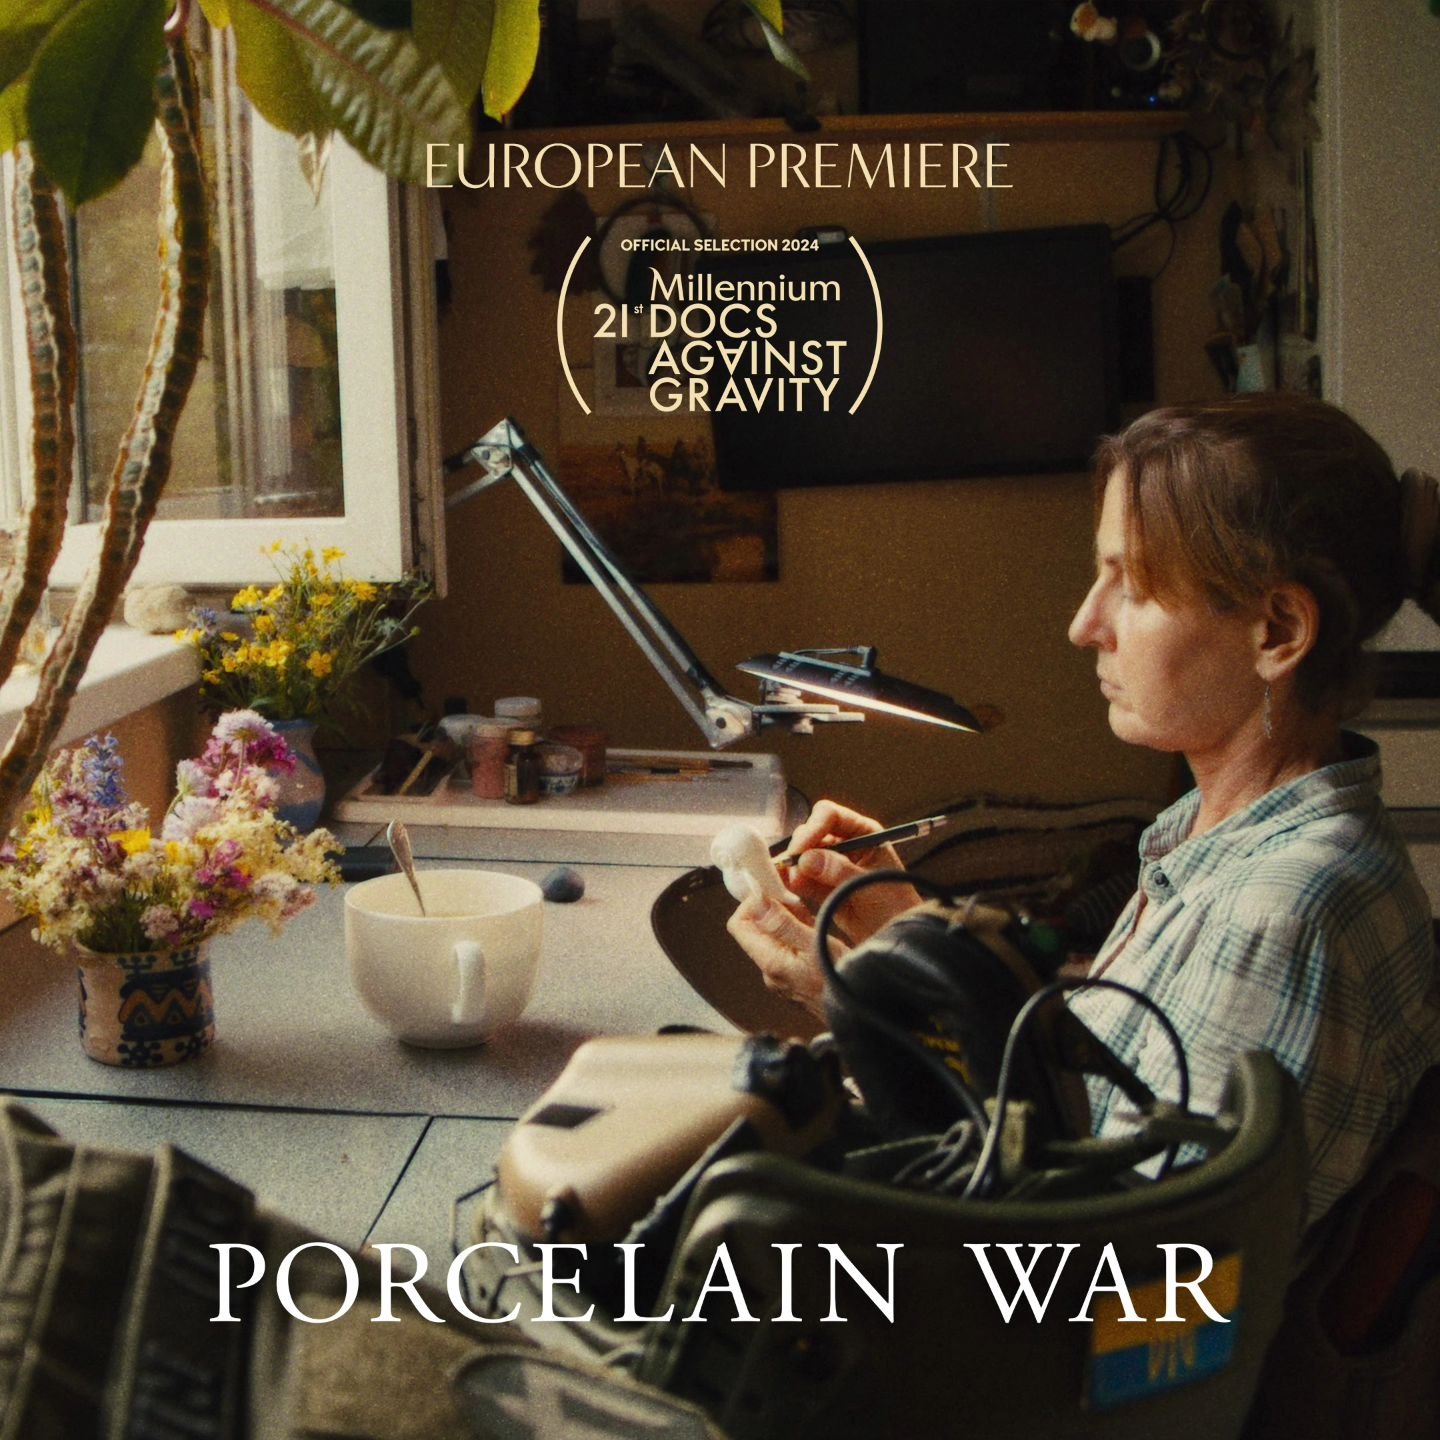 Our European Premiere of Porcelain War couldn't be more special. The incredible, hand drawn animations that were created especially for the film were done by the wonderful and talented Polish artists BluBlu Studios. Seeing Slava and Anya's art come t